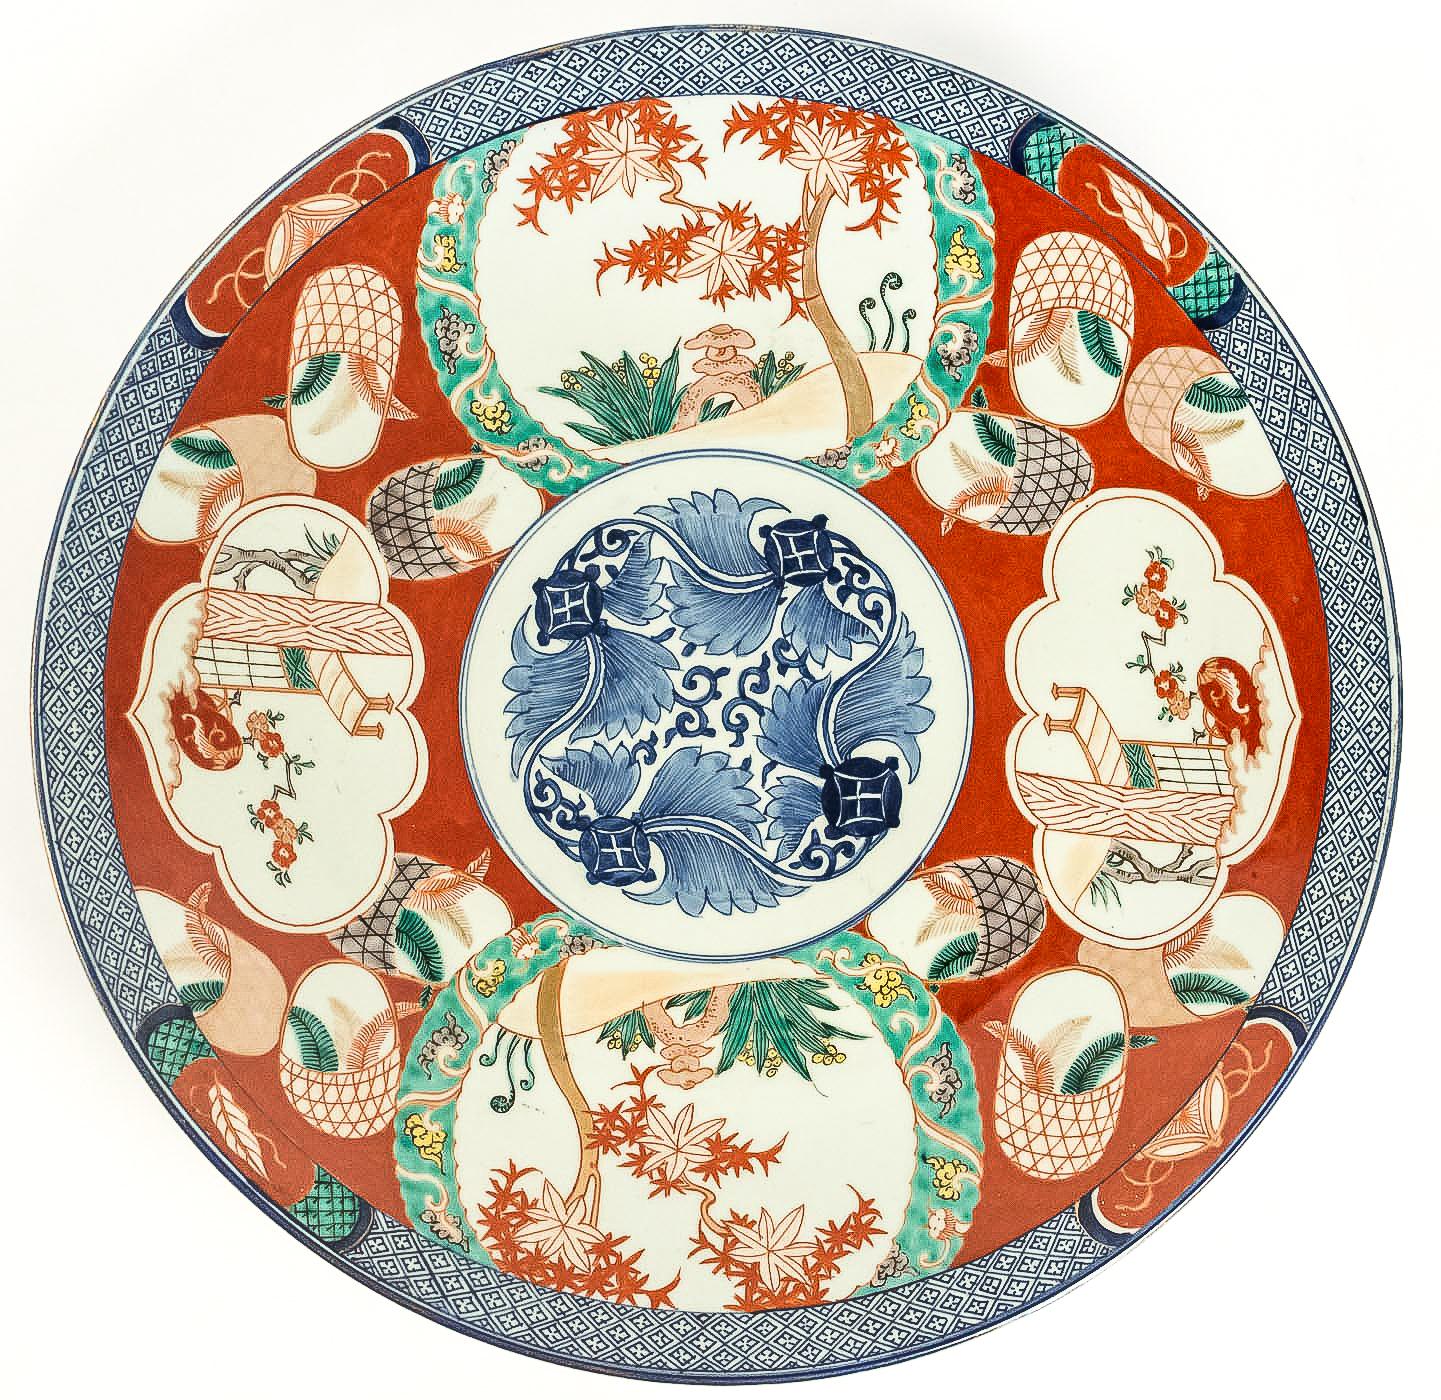 Mid-19th century Japanese polychrome porcelain, magnificent round dish.

A magnificent polychrome Japanese porcelain plate, hand painted in a red, depicting flowers all around the center.

Beautiful Japanese work, mid-19th-century, circa